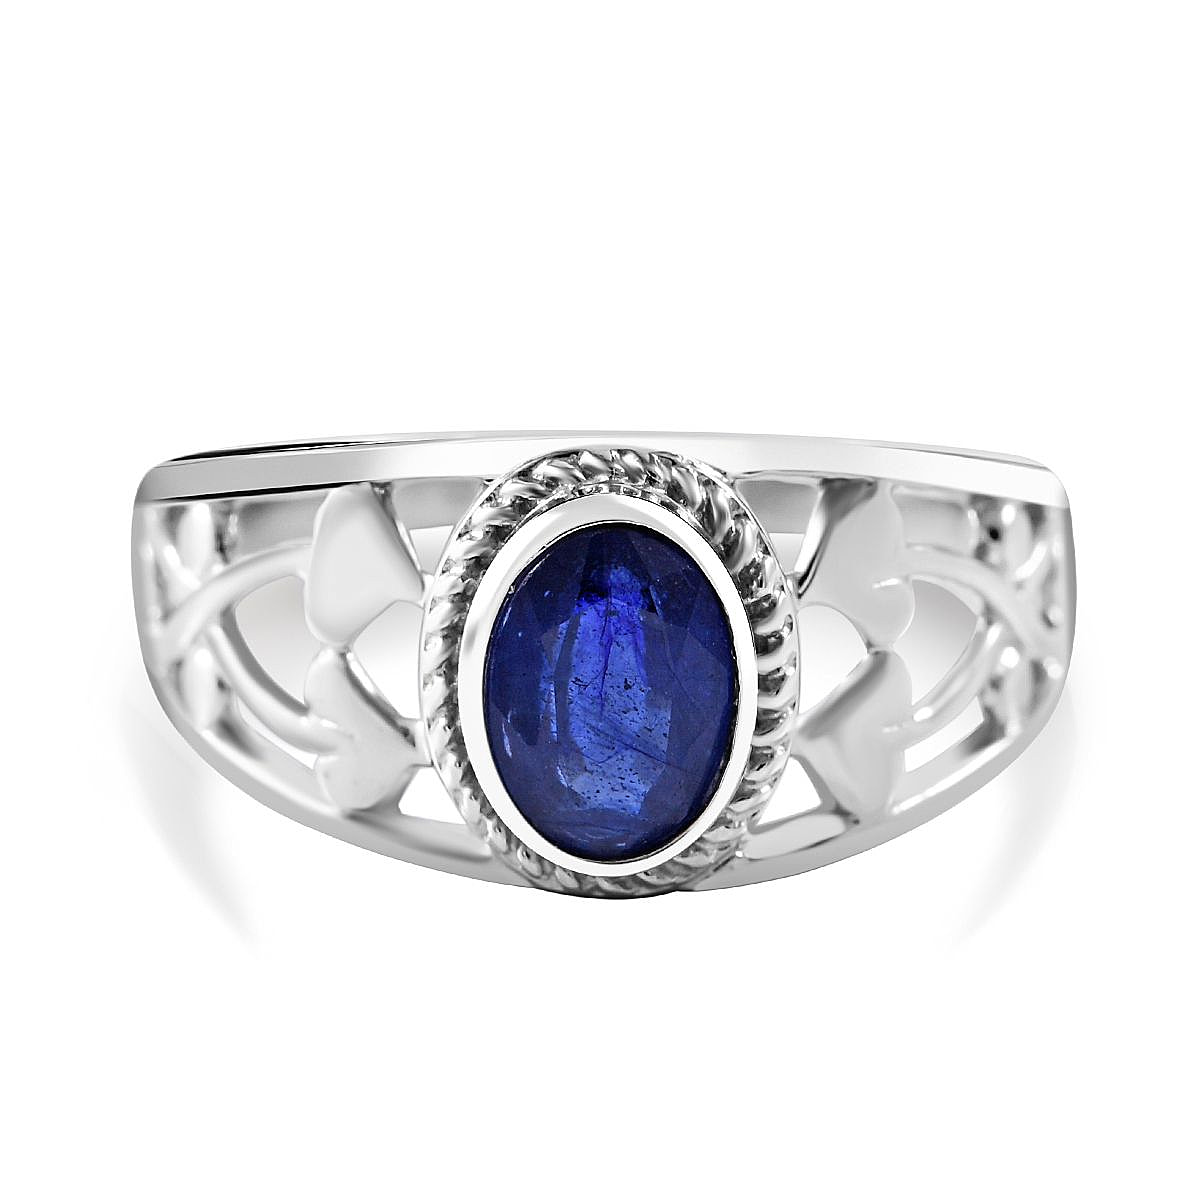 Masoala Sapphire Solitaire Ring in Rhodium Overlay Sterling Silver 1.17 Ct.